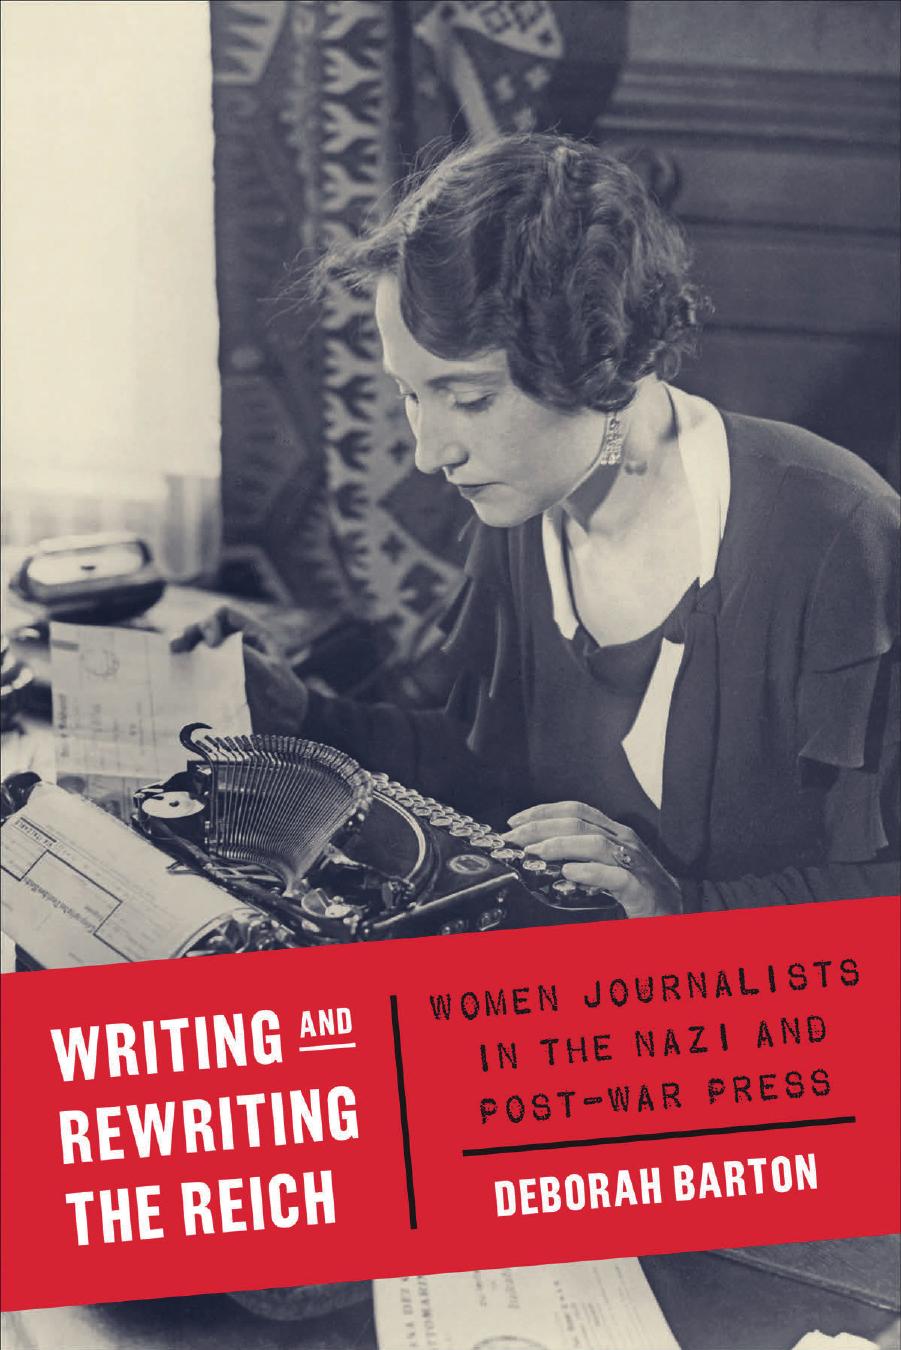 Writing and Rewriting the Reich: Women Journalists in the Nazi and Post-War Press by Deborah Barton